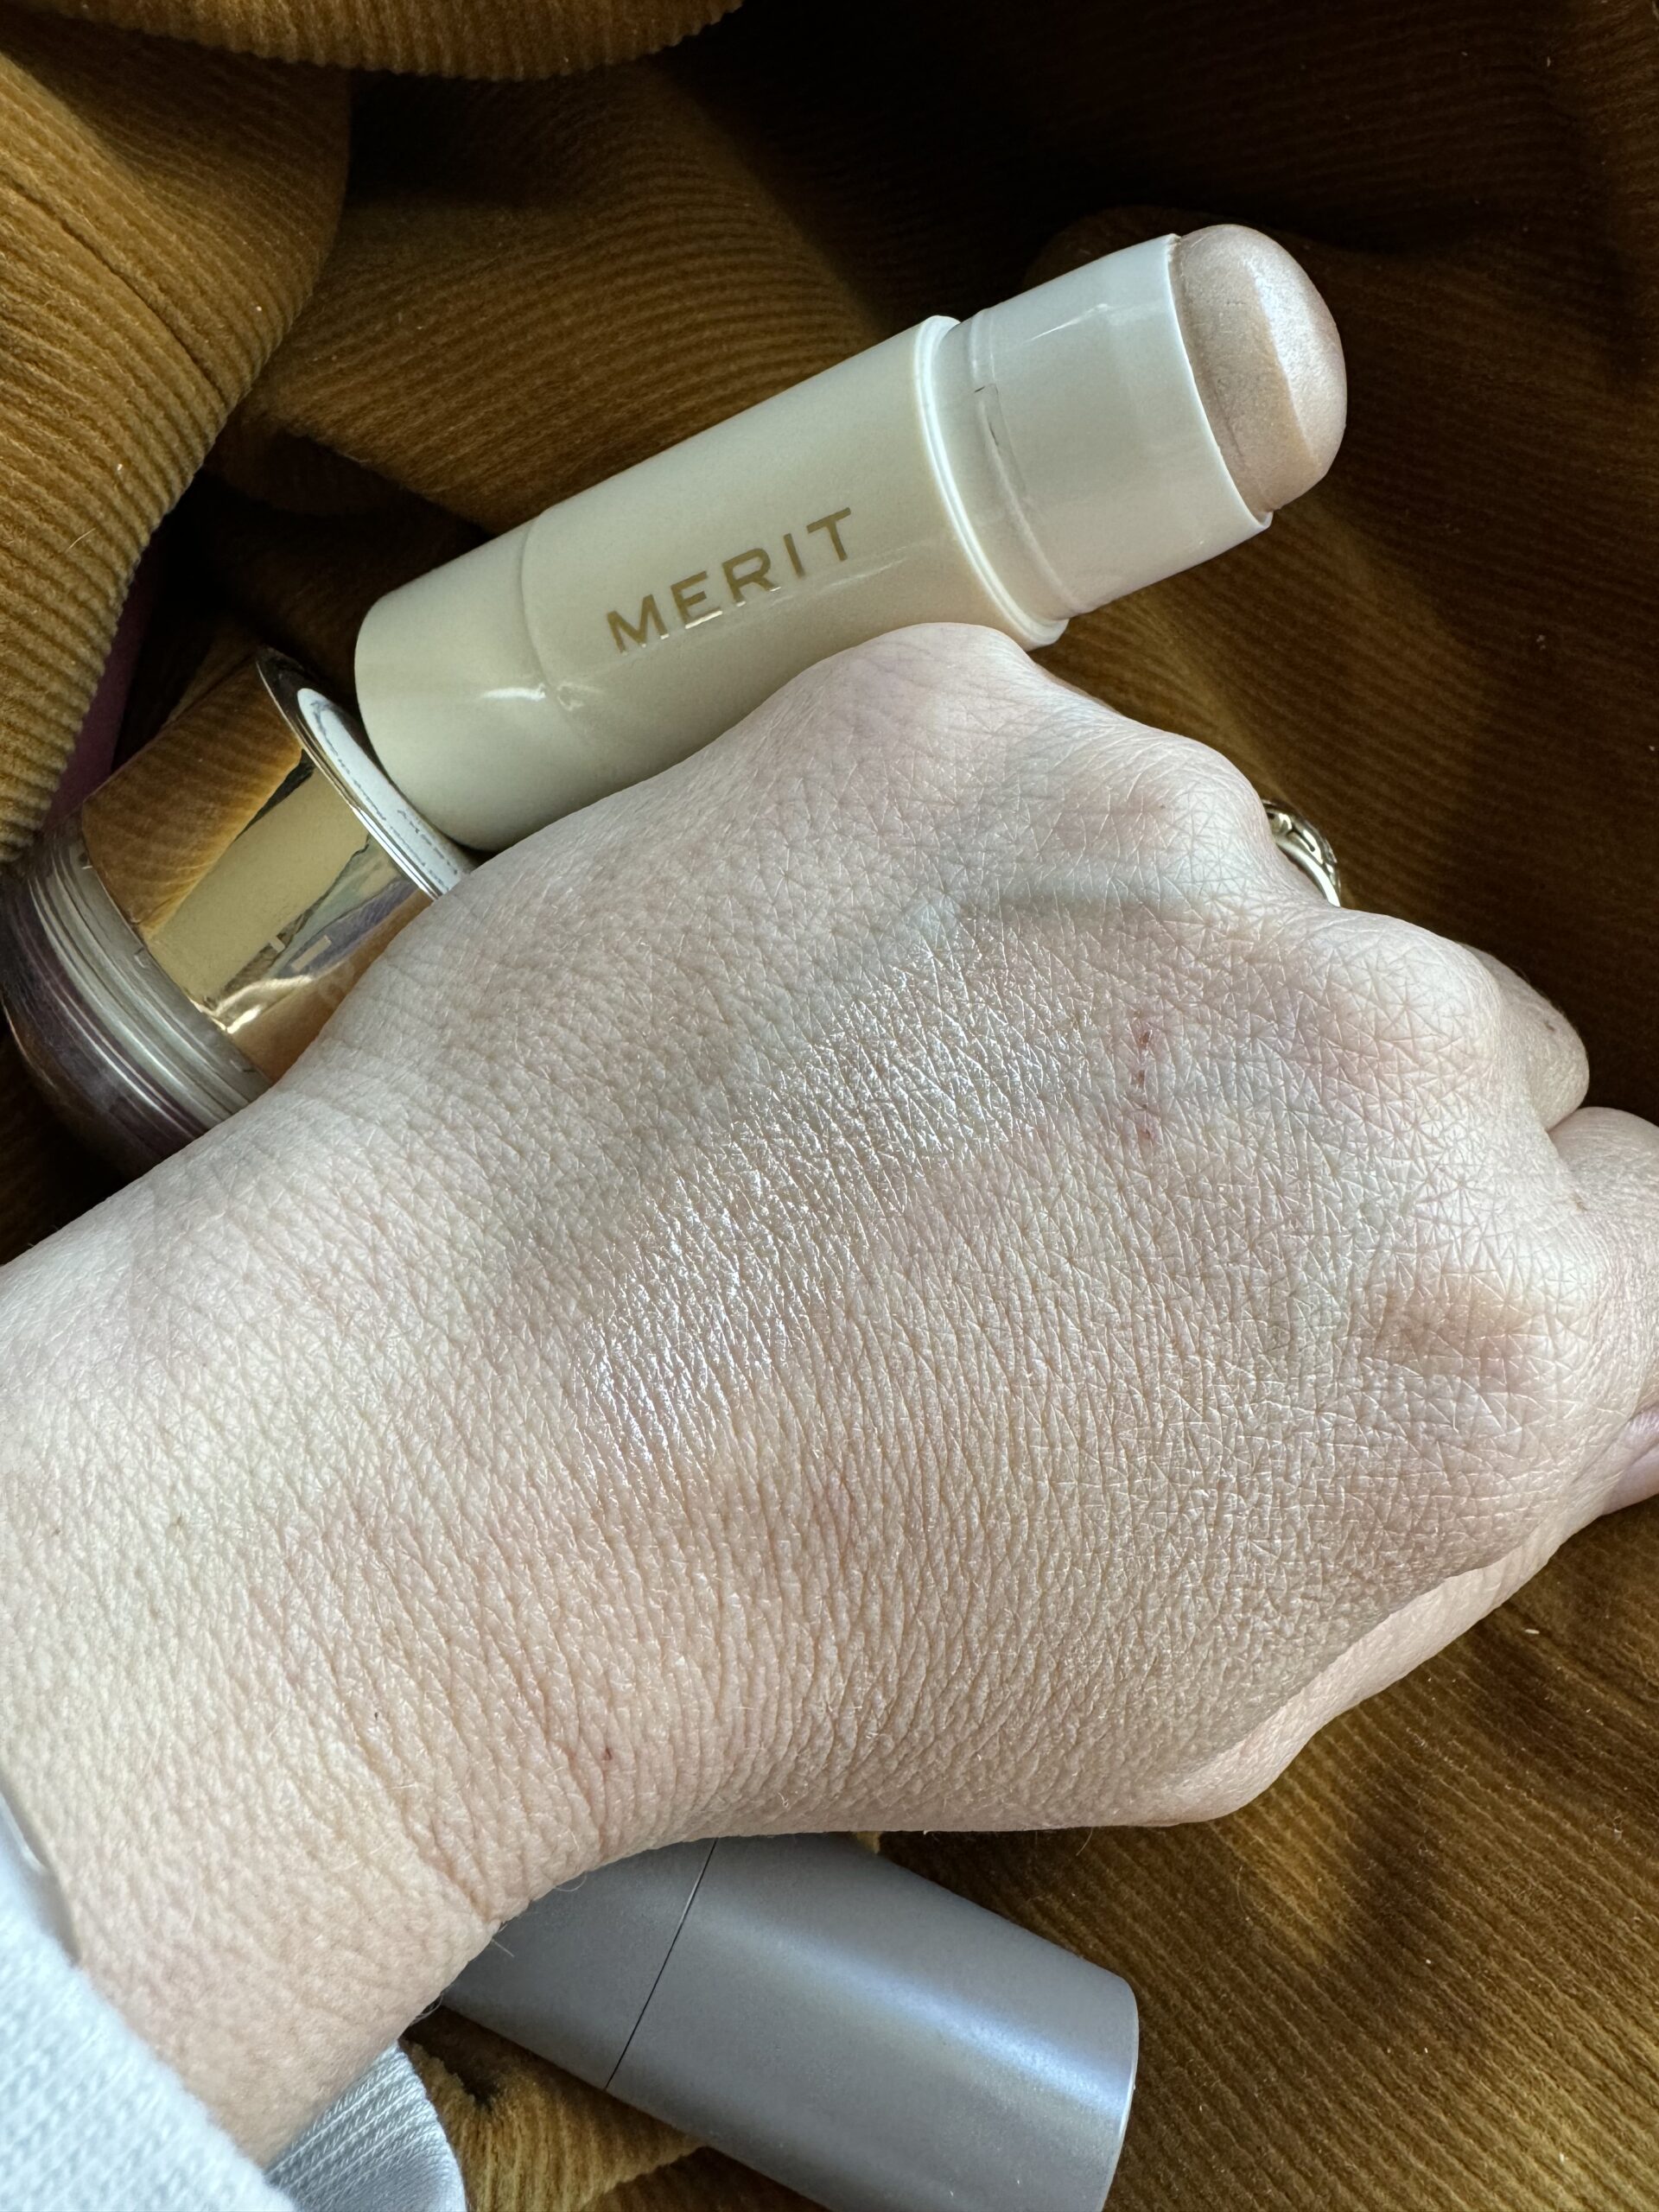 Swatch of cosmetic product on the back of a hand with cosmetic packaging in the background.